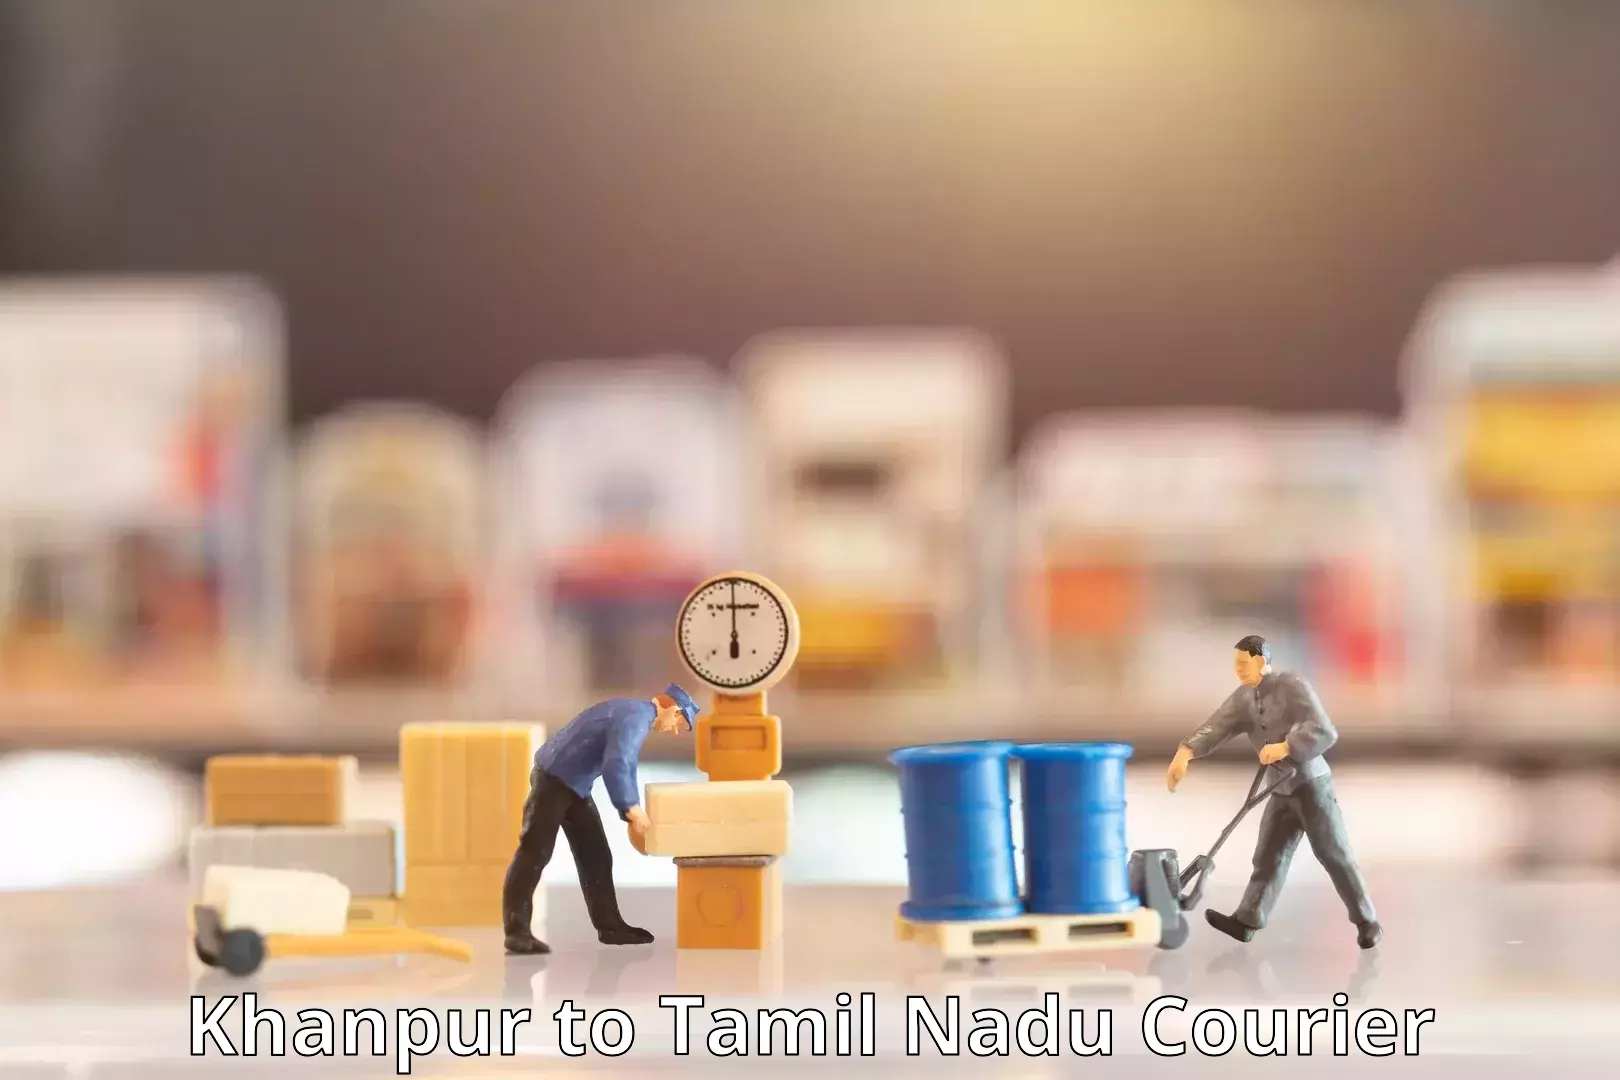 Personalized courier experiences Khanpur to Tirupur